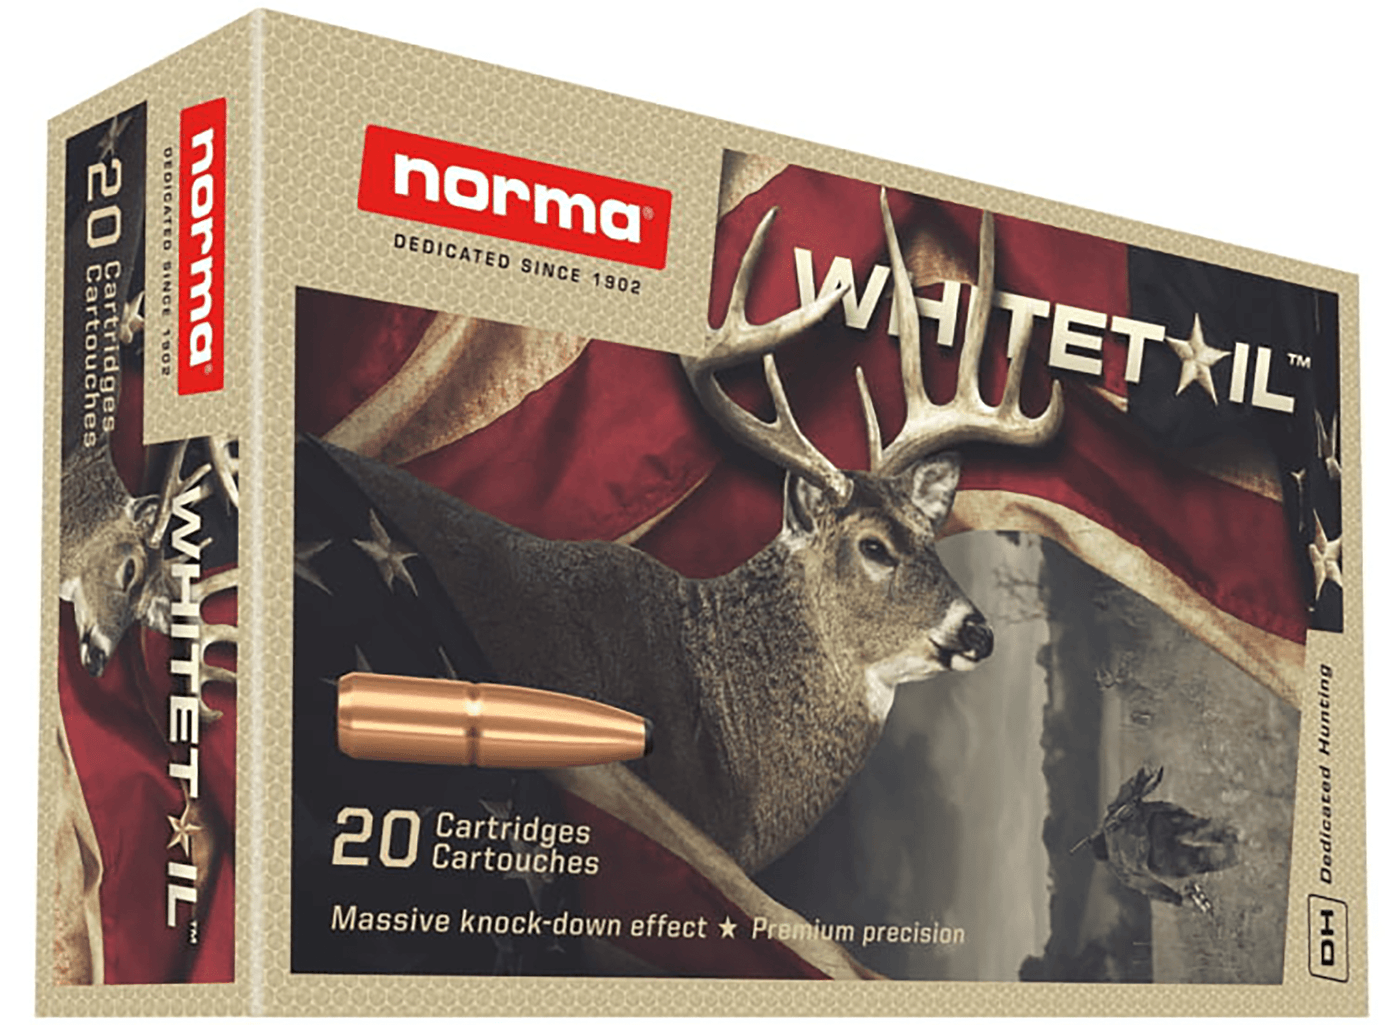 NORMA AMMUNITION (RUAG) Norma Ammunition (ruag) Whitetail, Norma 20171512 7mm Rem 150gr Psp Whitetail   20/10 Ammo